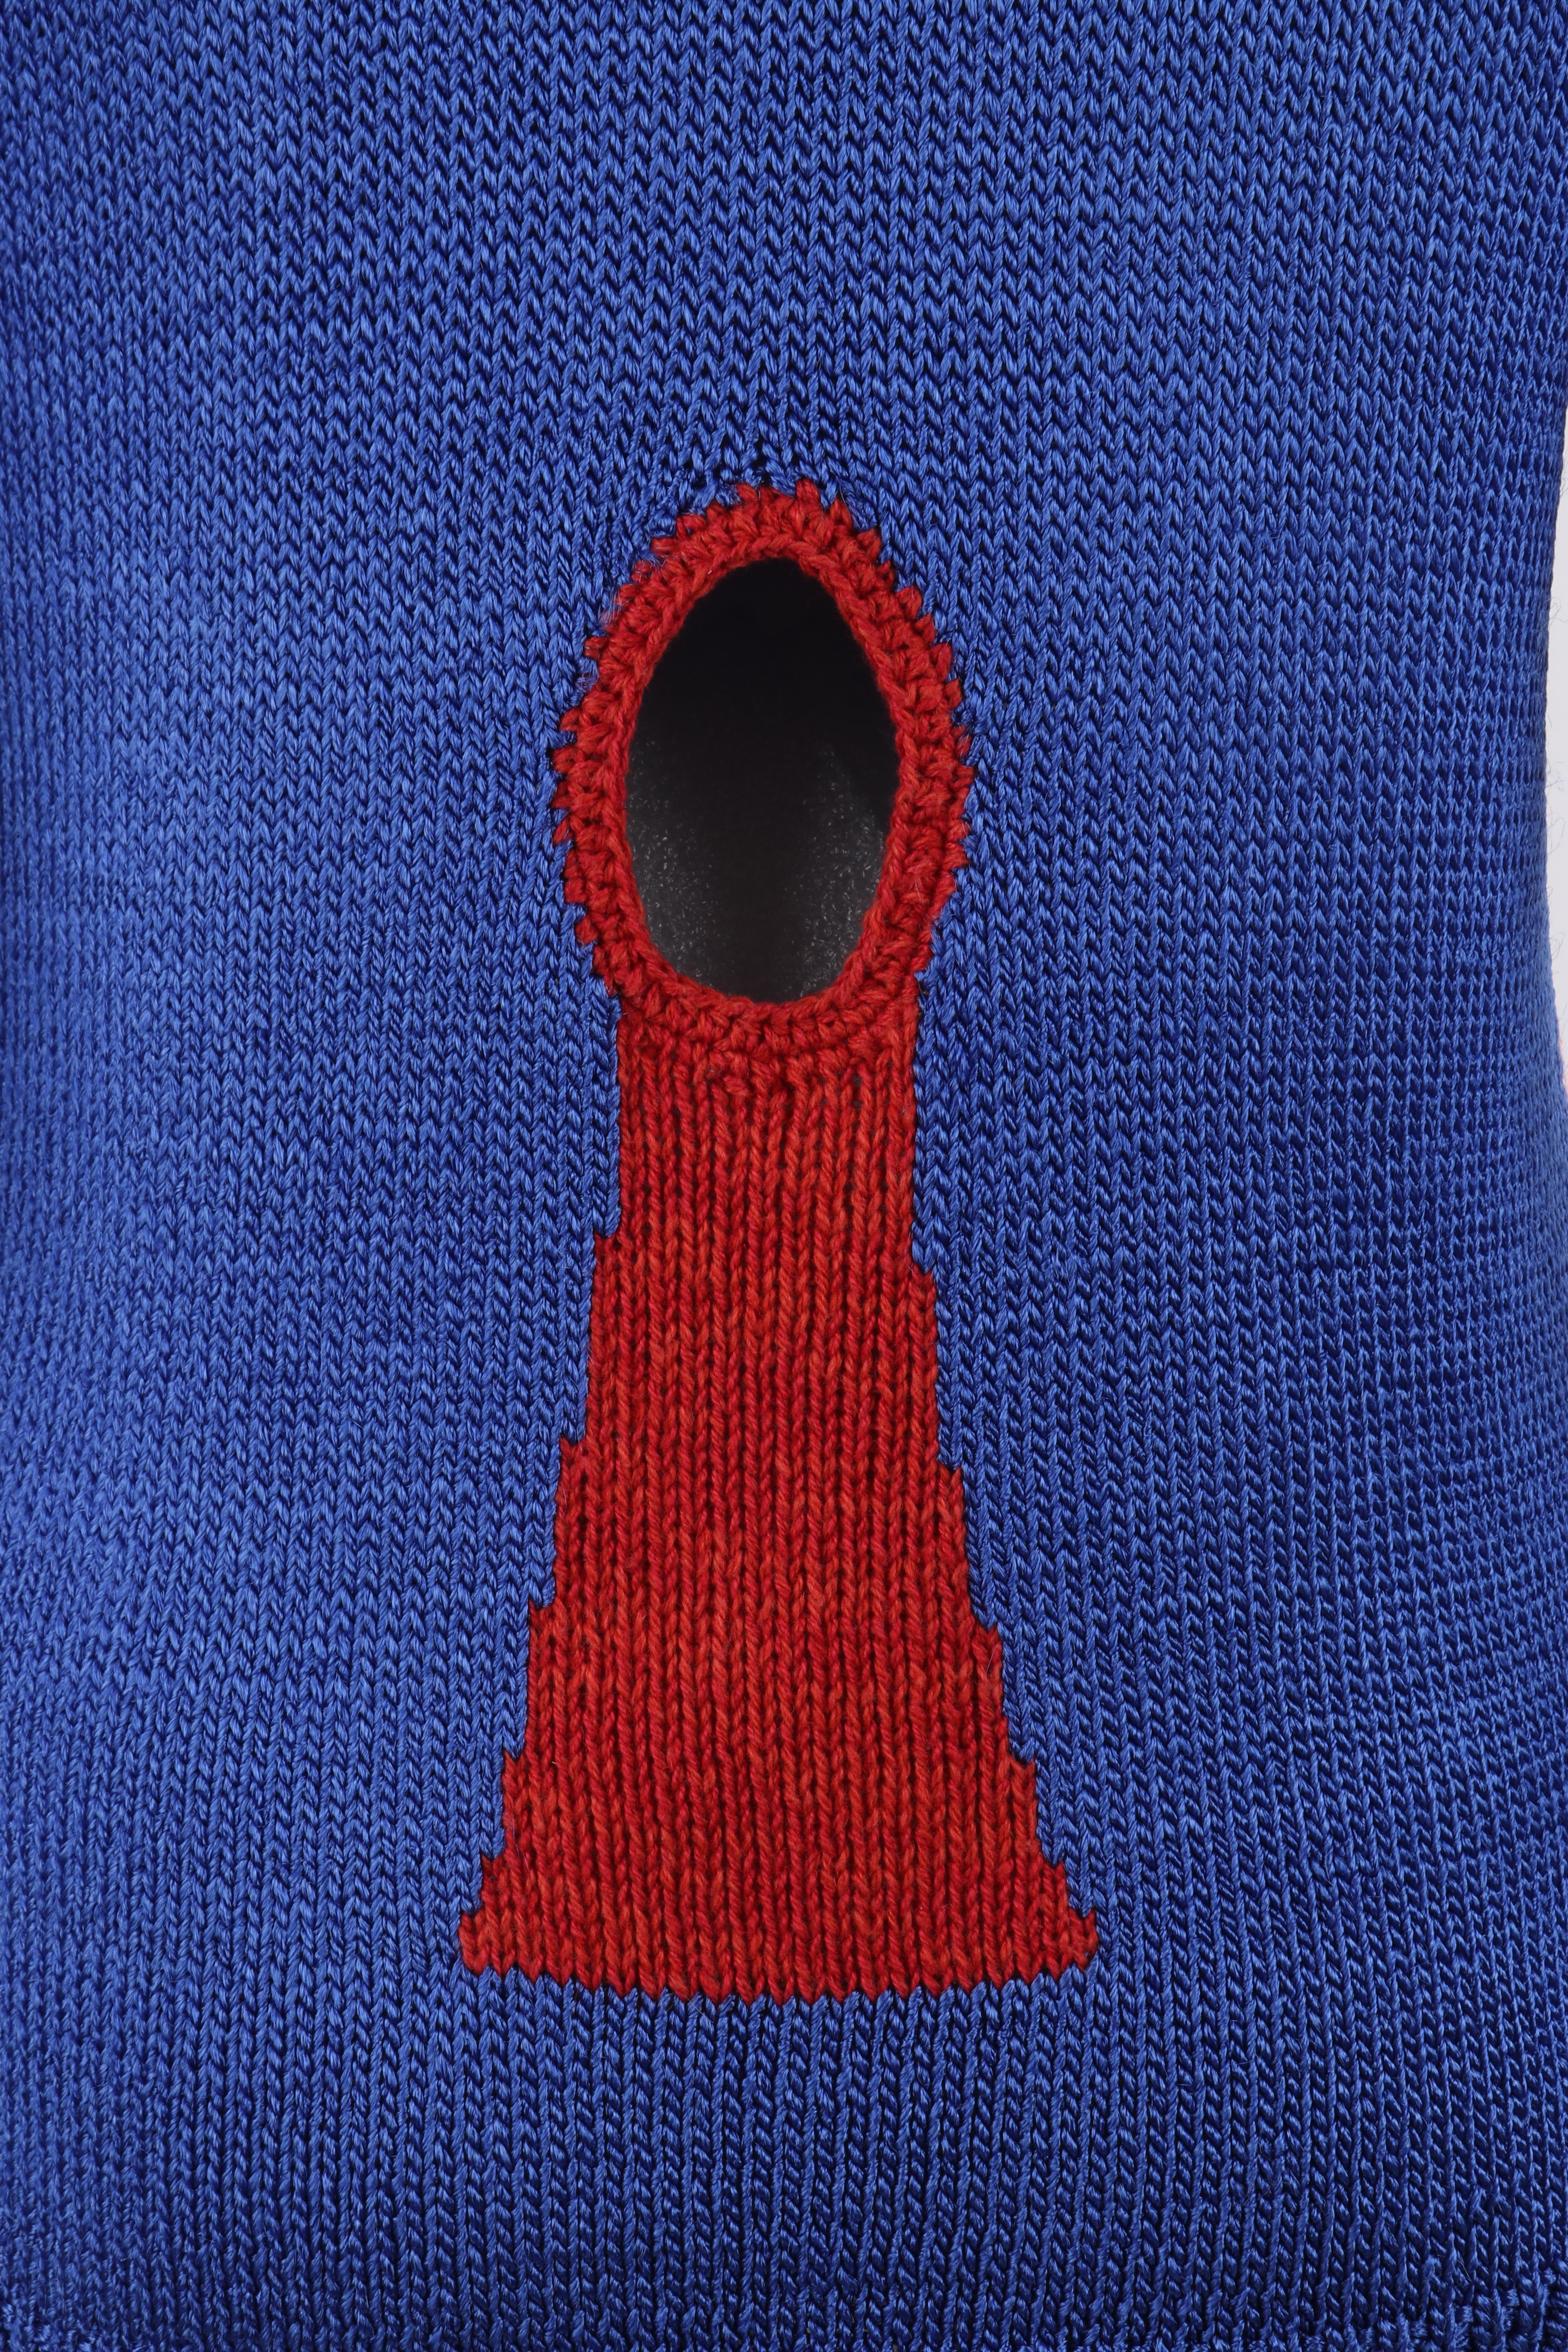 SURVIVAL OF THE FASHIONEST S/S 2020 Pull-over en tricot bleu Smiley Face Pull-over Top S en vente 7